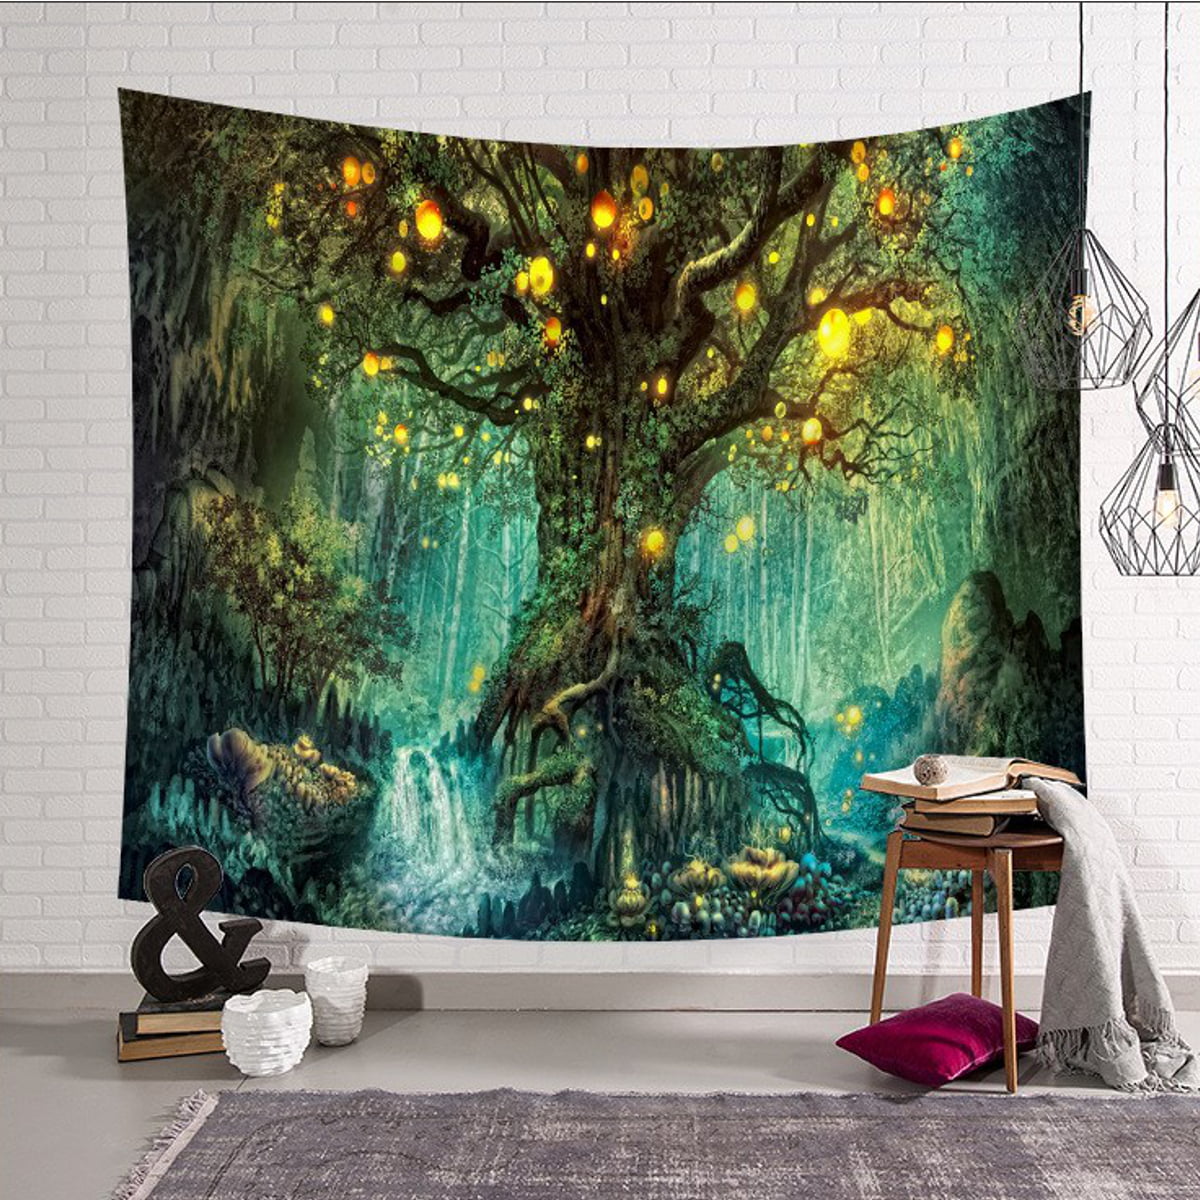 Forest Tapestry,Nature Tapestry Wall Hanging,Scenery Wall Tapestry,Fabric Tapestry,Picture On Wall,Large Tapestry For Wall Decor,Home decor